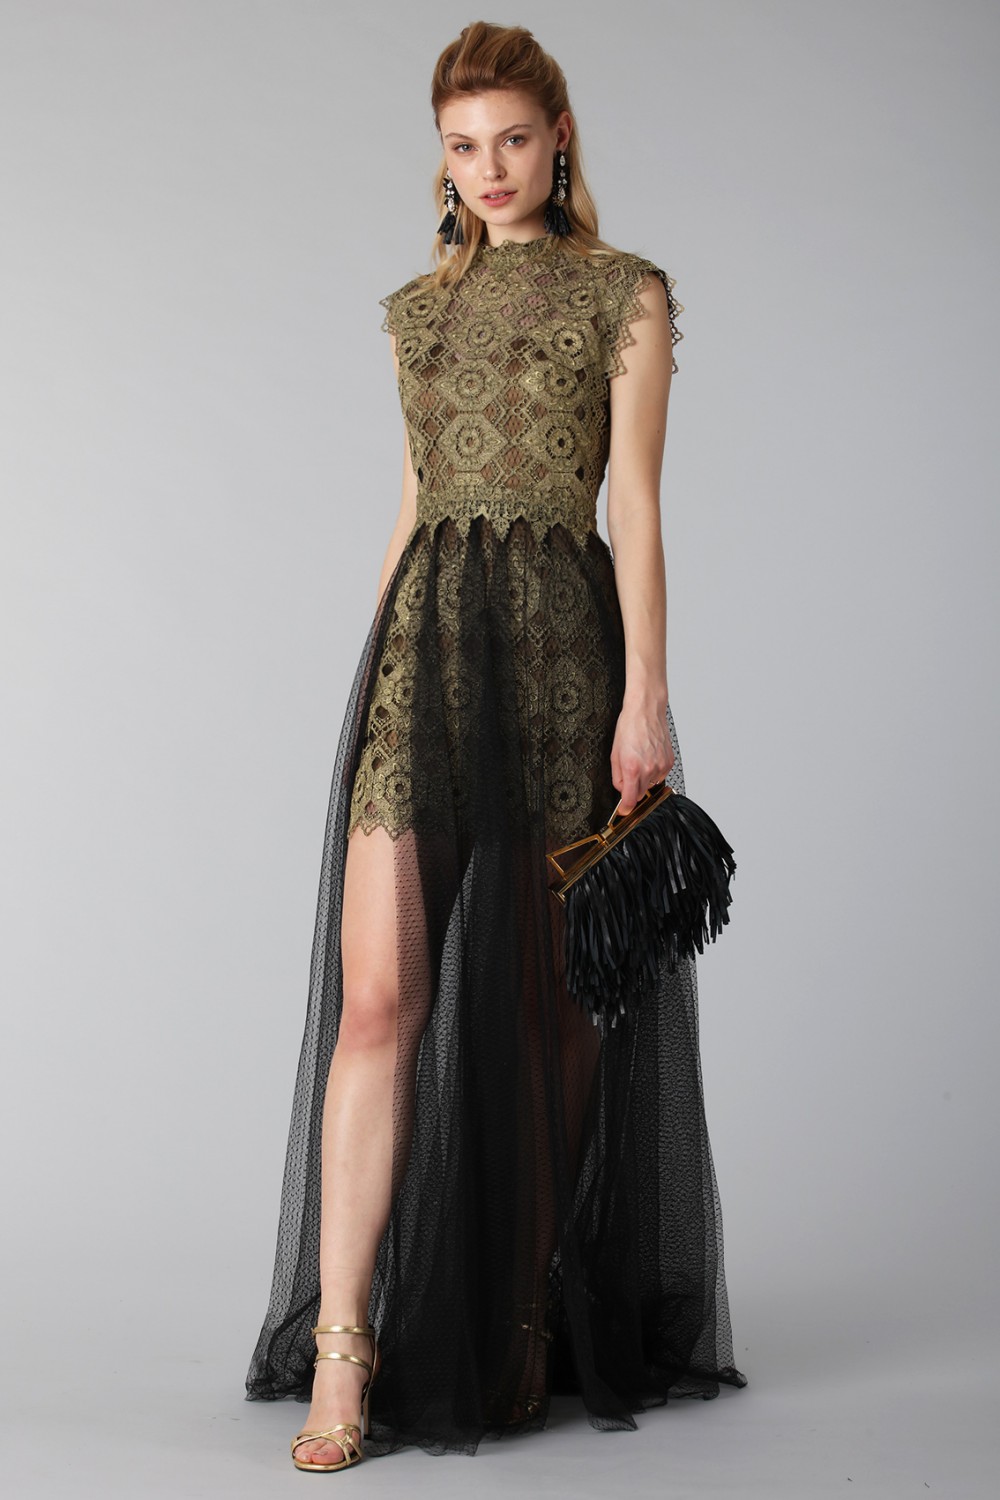 Lace dress with tulle skirt